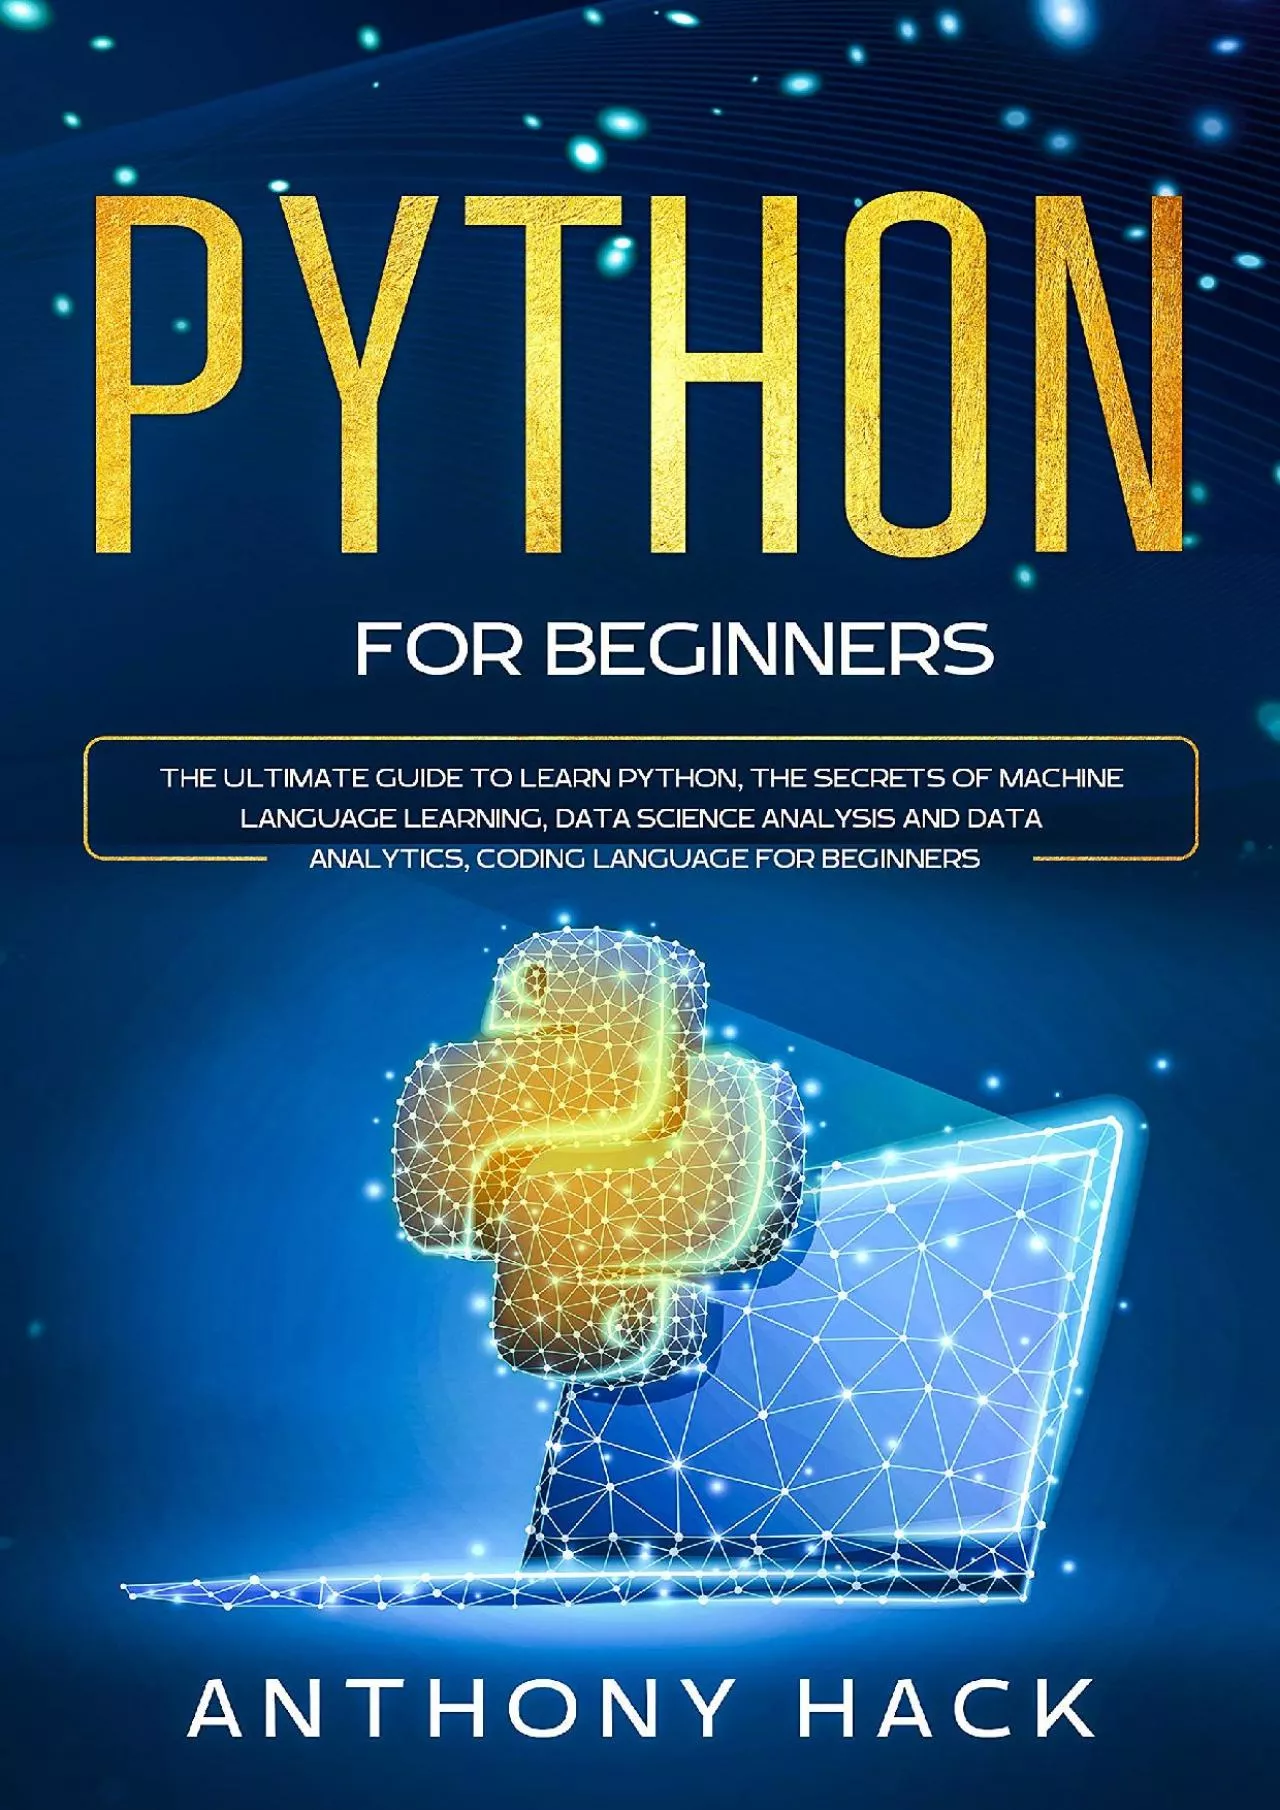 [eBOOK]-PYTHON FOR BEGINNERS The Ultimate Guide to Learn Python, the Secrets of Machine